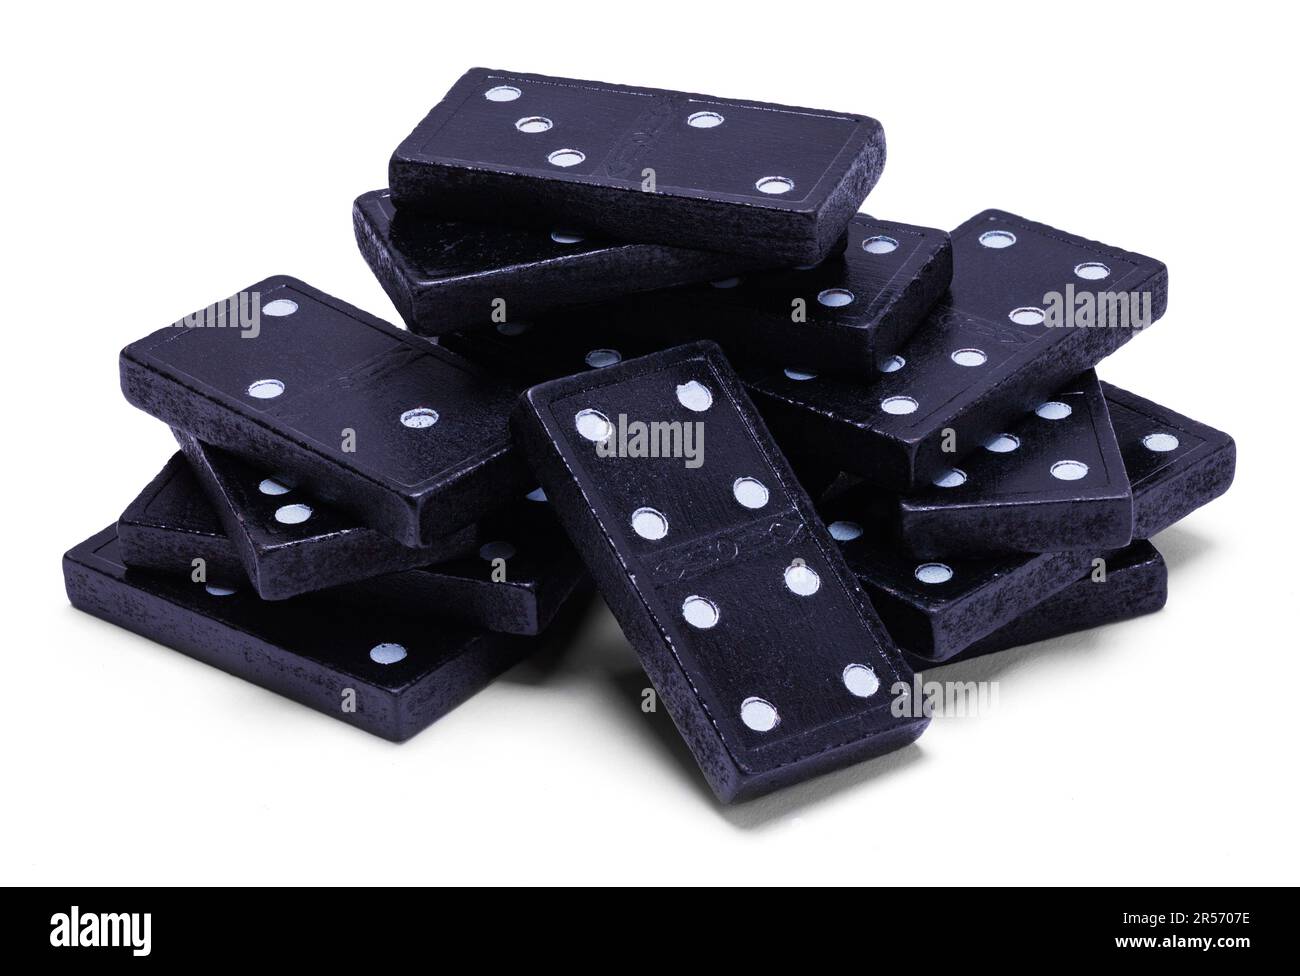 Pile of Black Dominos Cut Out on White. Stock Photo